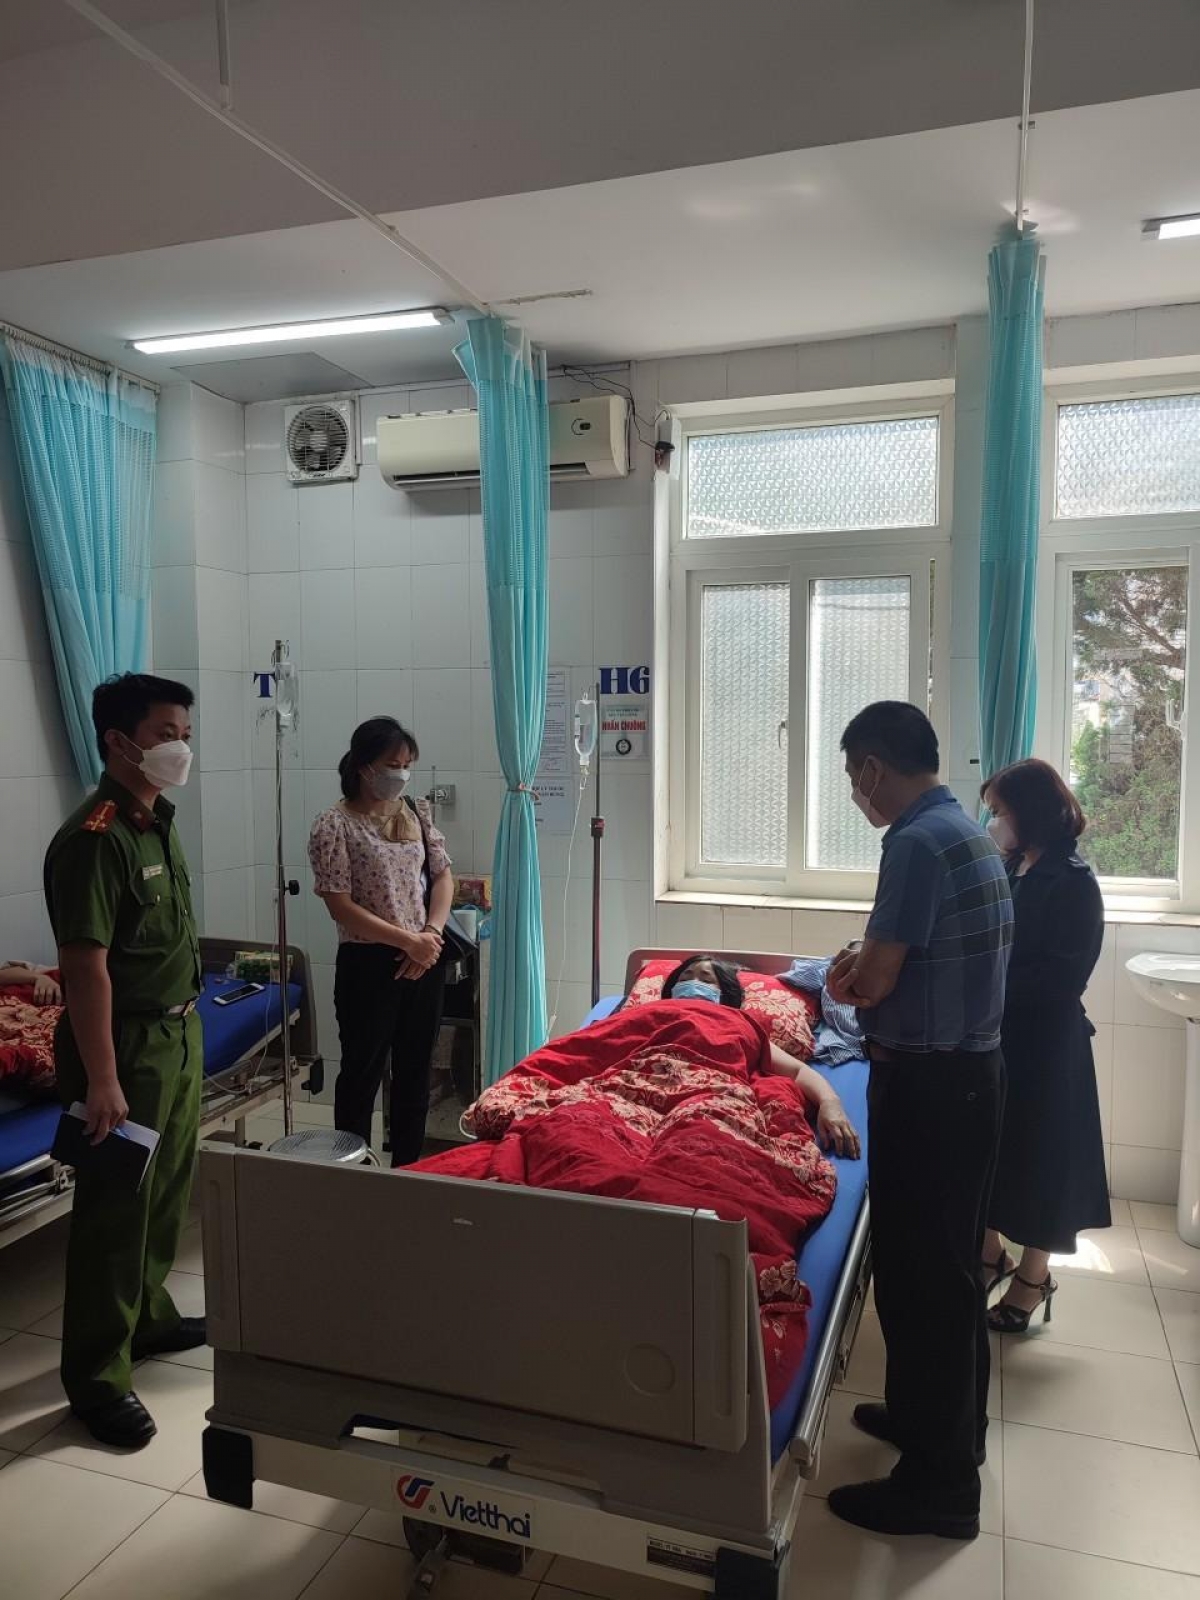 The case of 5 employees being hospitalized for eating a bag of cakes picked up: A hotel fine of 8 million VND - Photo 1.